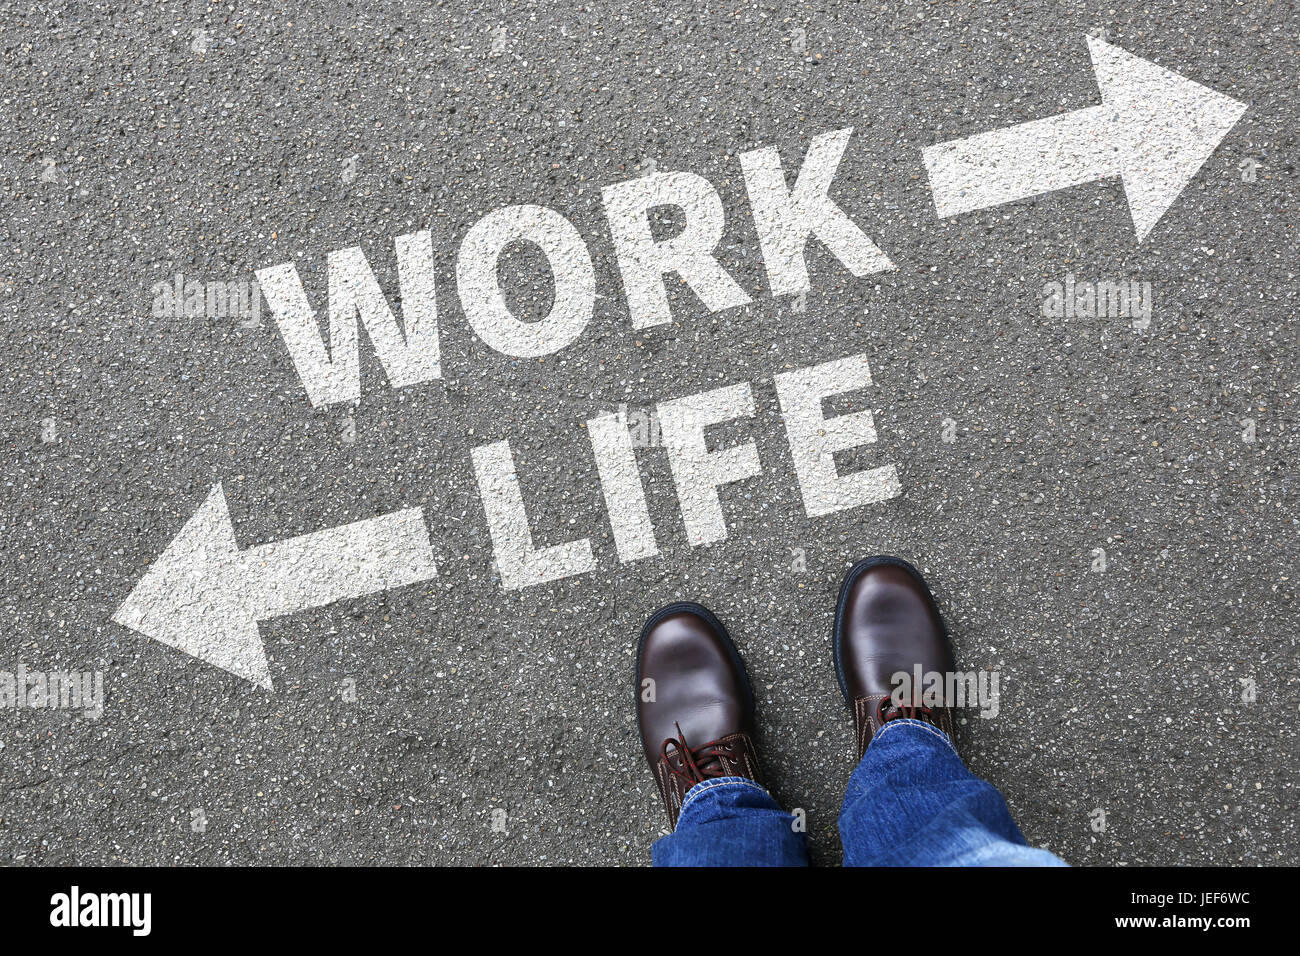 Work life balance living stress stressed relax health business concept healthy Stock Photo